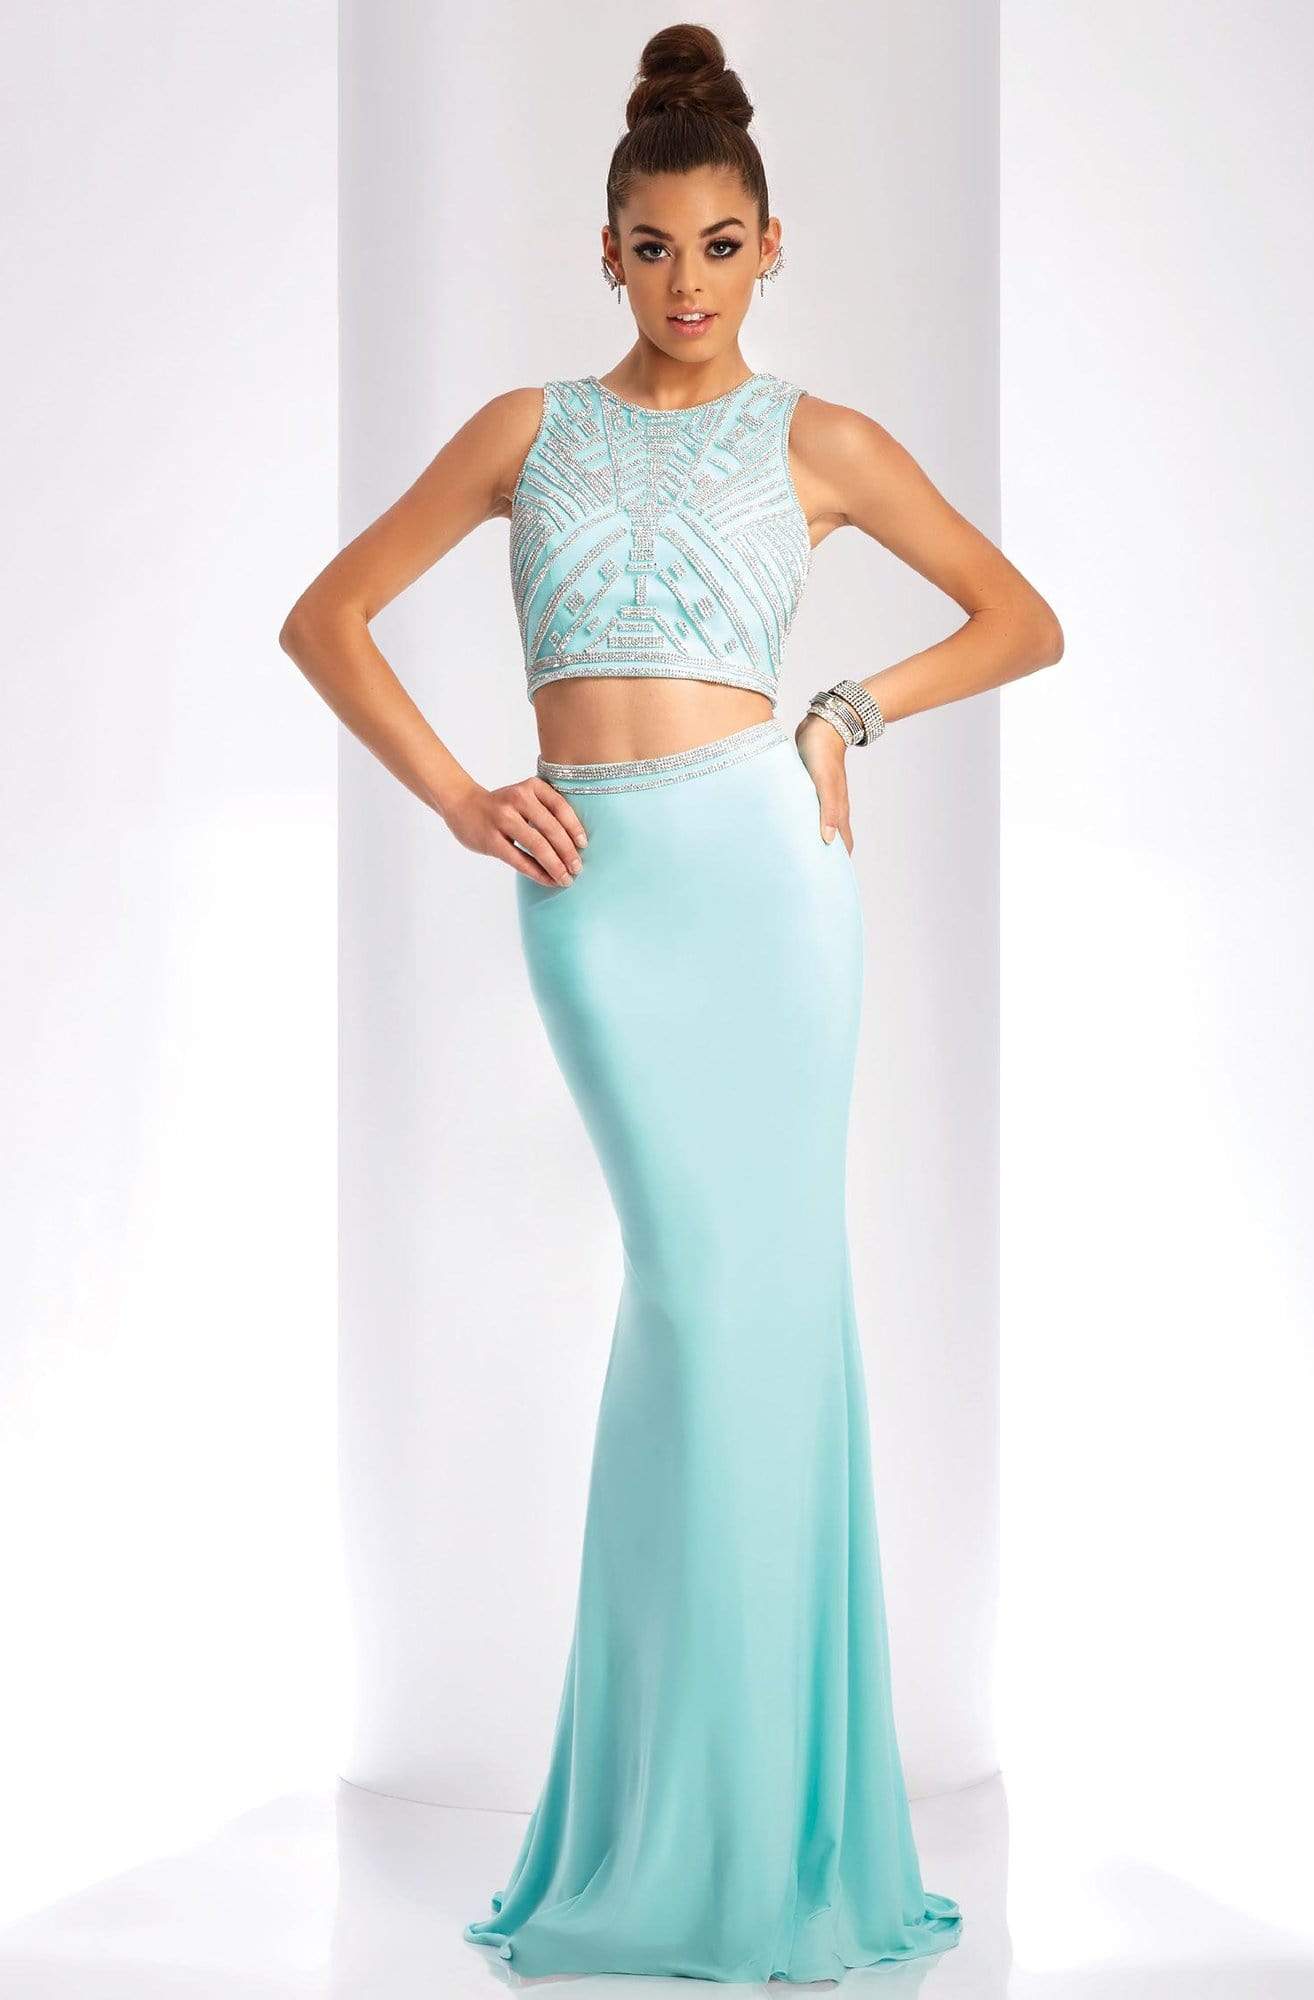 Clarisse - 3438 Two-Piece Crystal Ornate Sheath Gown
